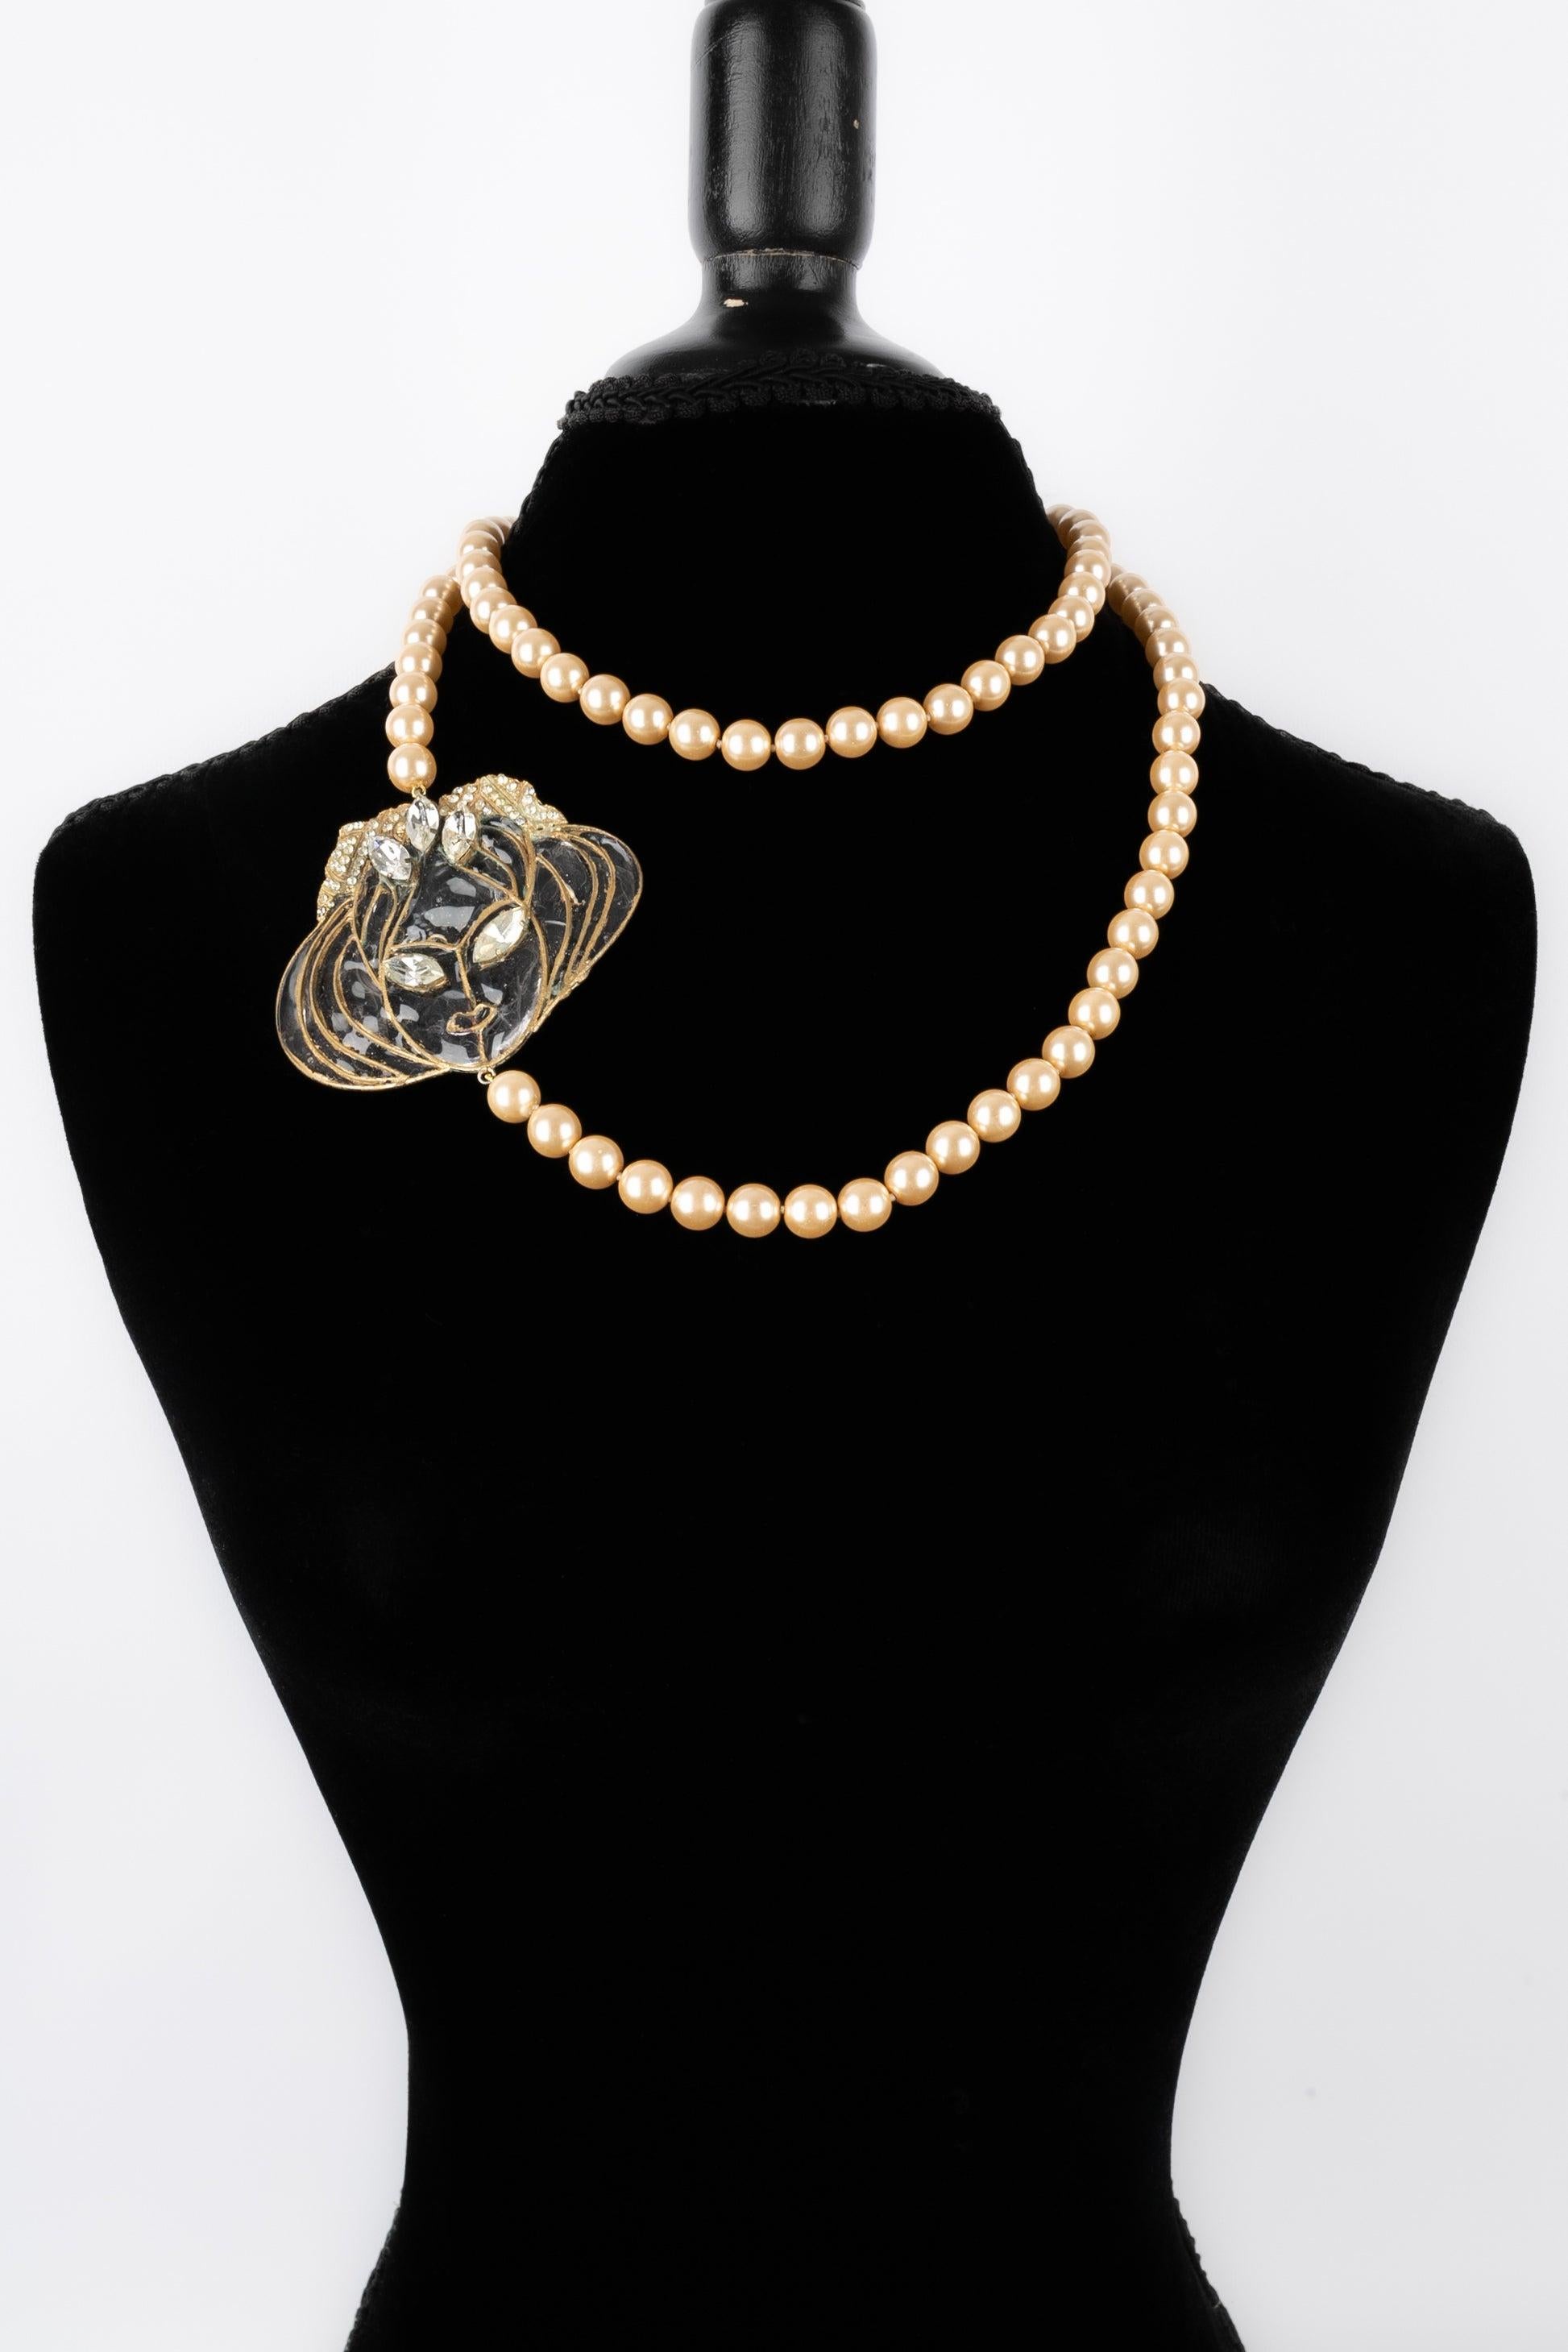 Jean-Louis Scherrer - Long costume pearl necklace assembled with knots, with a glass paste medallion representing a face. To be mentioned, some defects on the glass paste.

Additional information: 
Condition: Very good condition
Dimensions: Length: